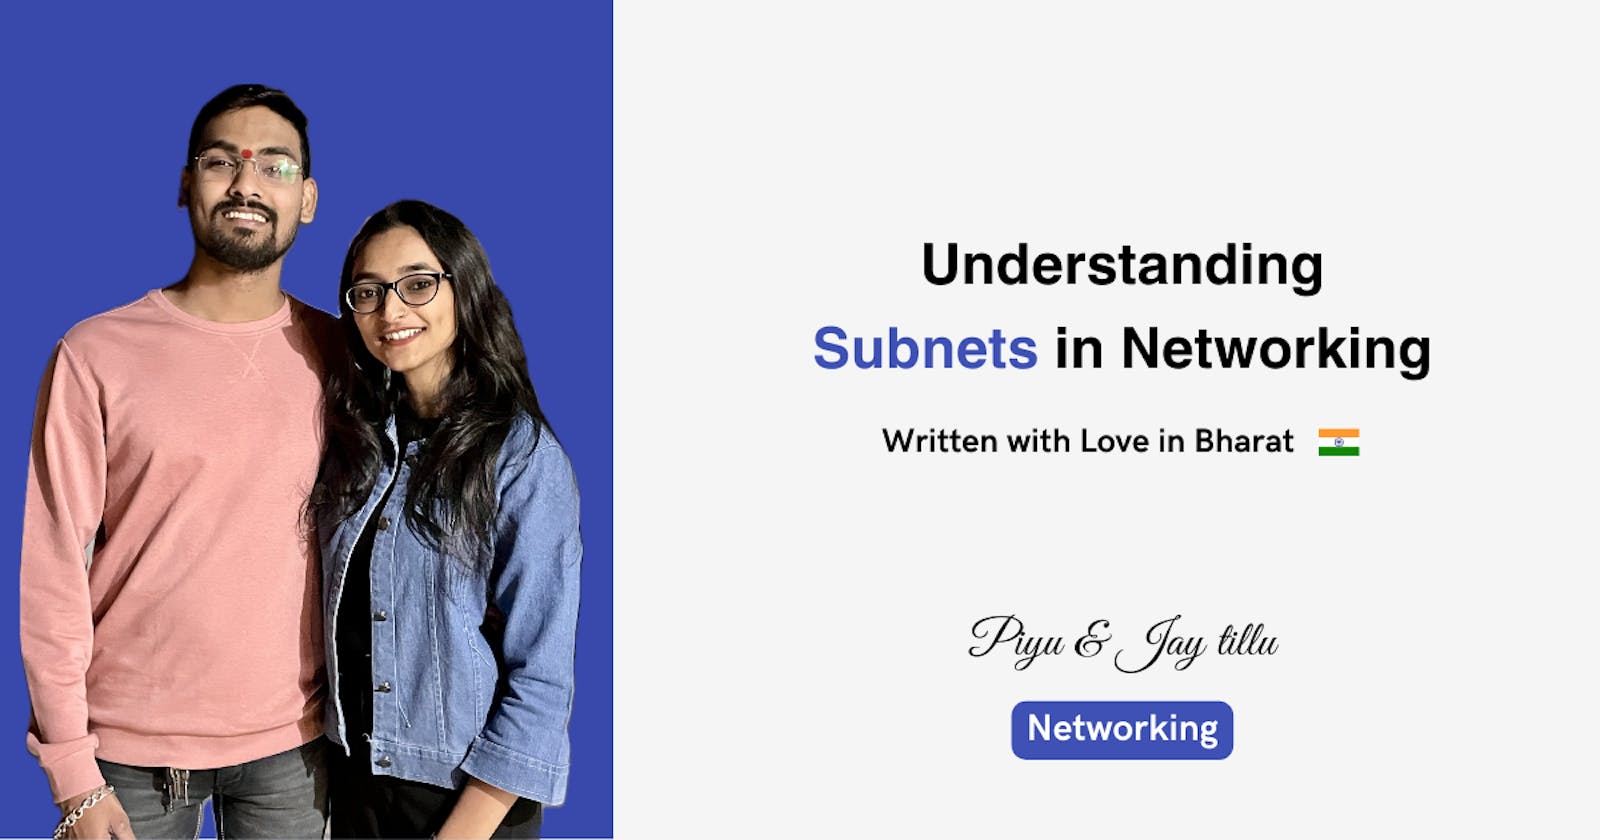 What are Subnets in Networking?